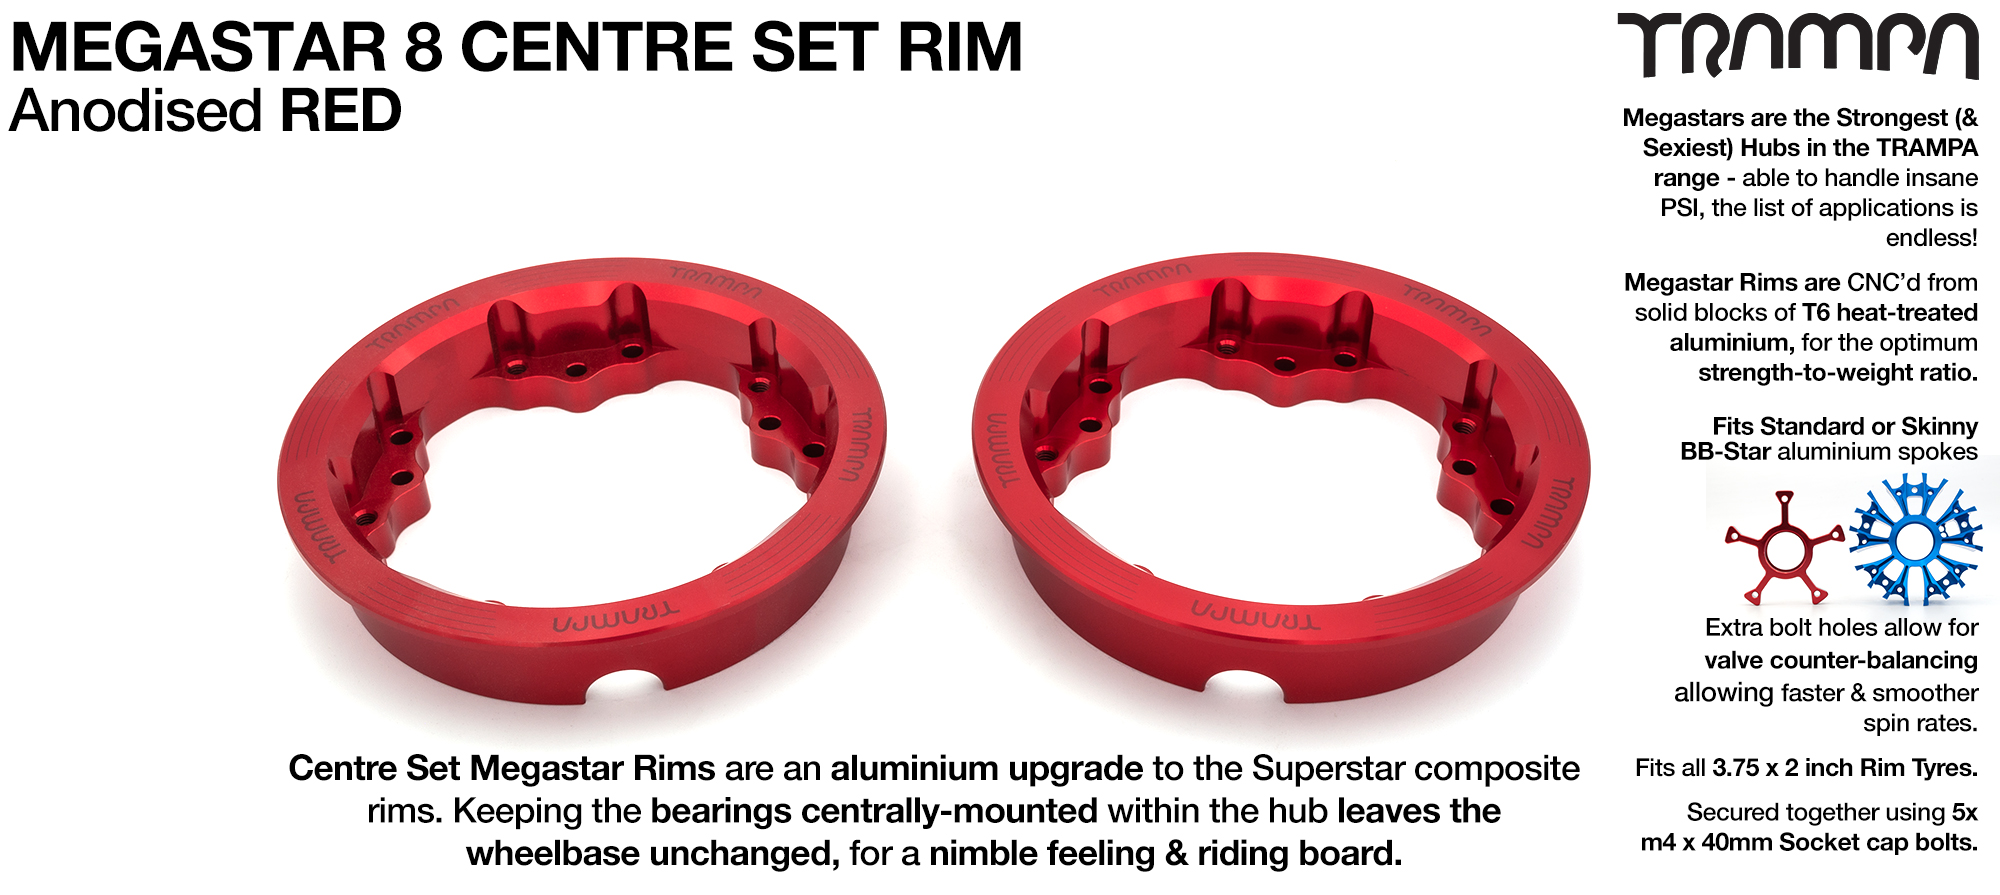 MEGASTAR 8 CS Rims Measure 3.75 x 2 Inch. The bearings are positioned CENTRE-SET & accept all 3.75 Rim Tyres - RED